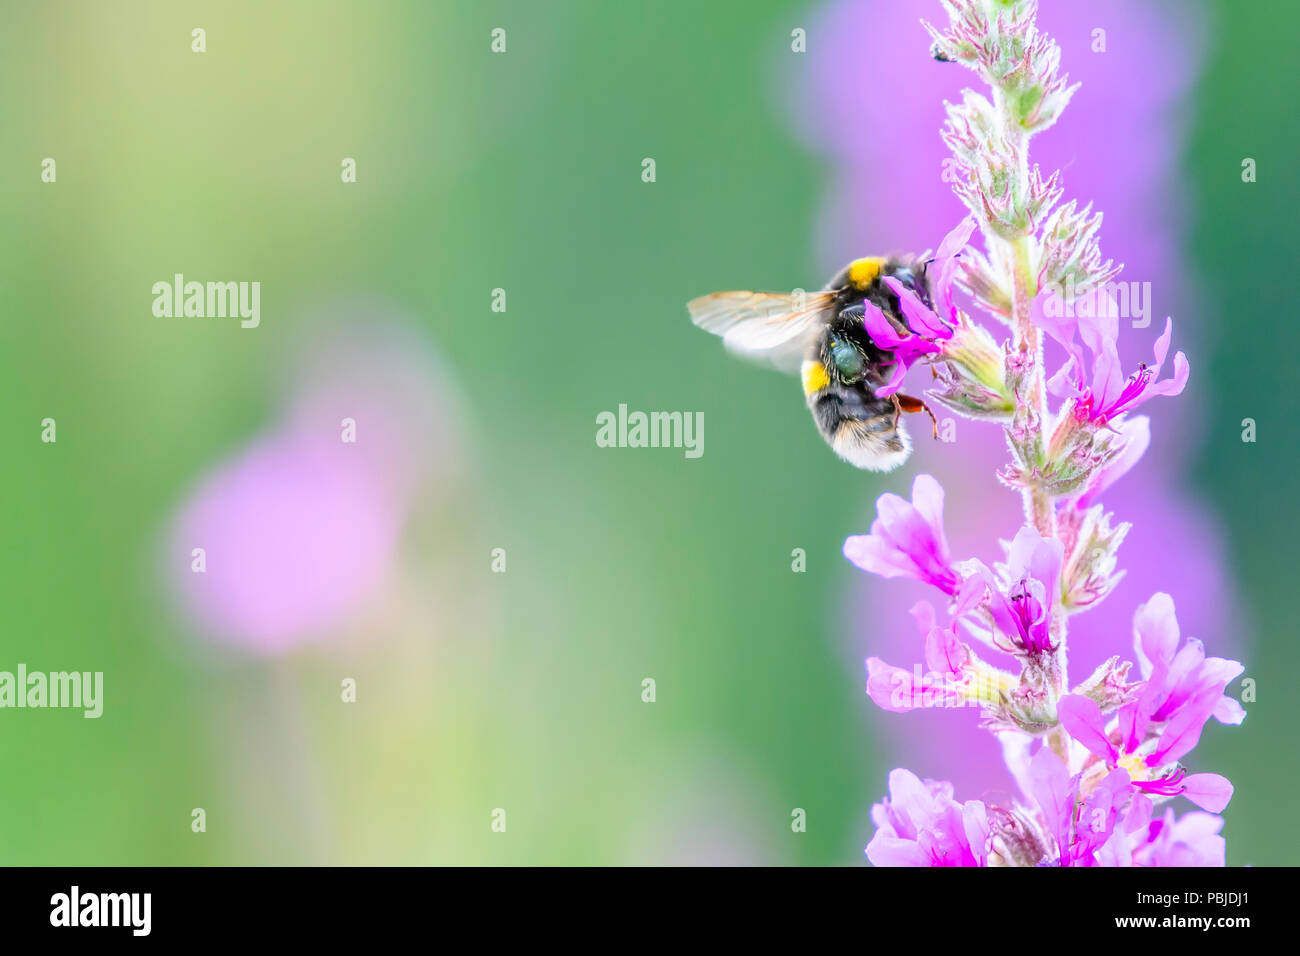 Bumblebee collecting nectar from pink flowers growing on meadow in Uk.Colorful, bright and vibrant  nature image.Space for copy, blurred background. Stock Photo